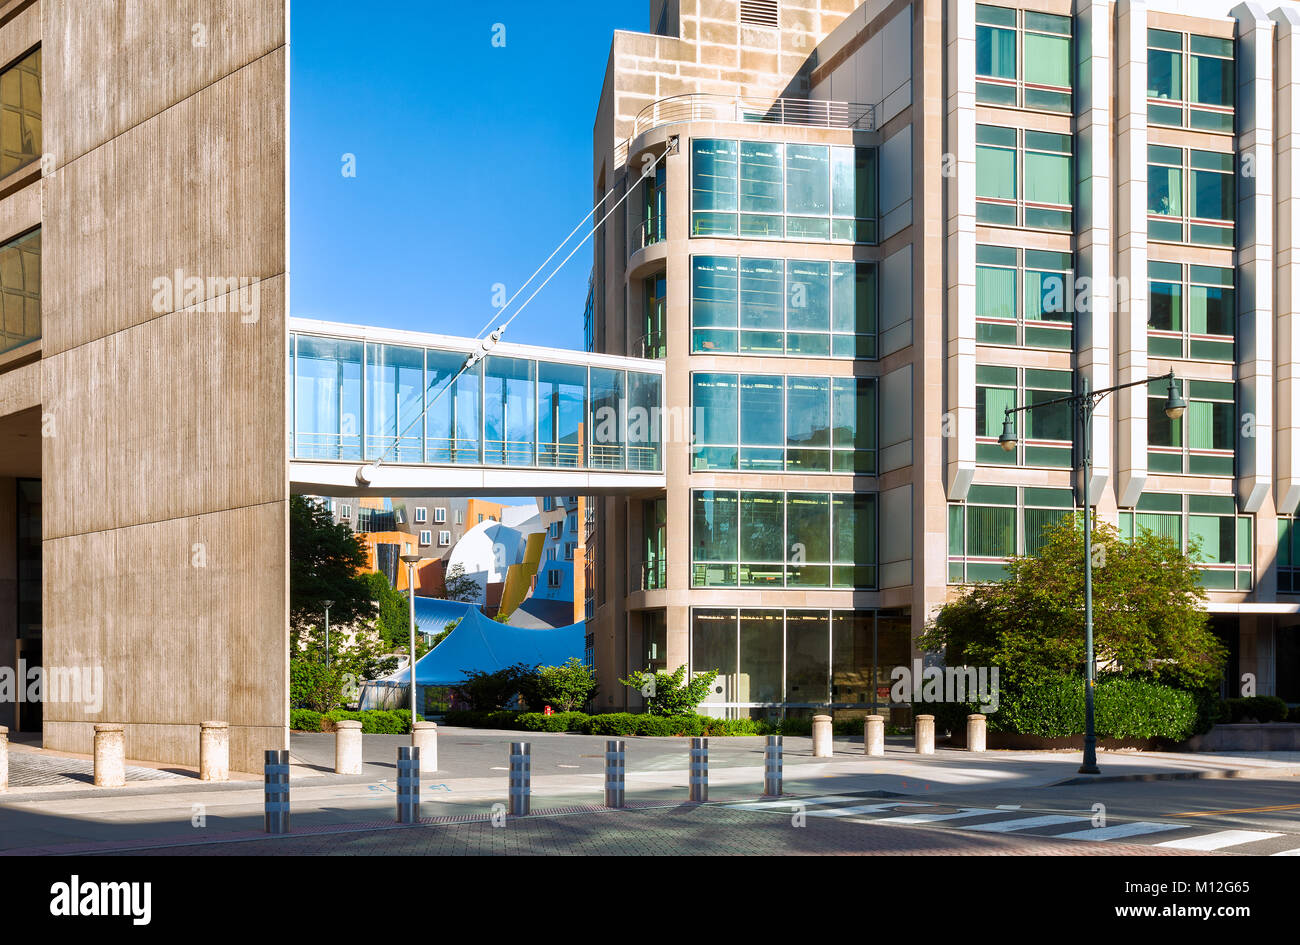 The MIT campus is known for its innovative architecture and buildings featuring unusual angles,shown here. This example has a glass skywalk. Stock Photo